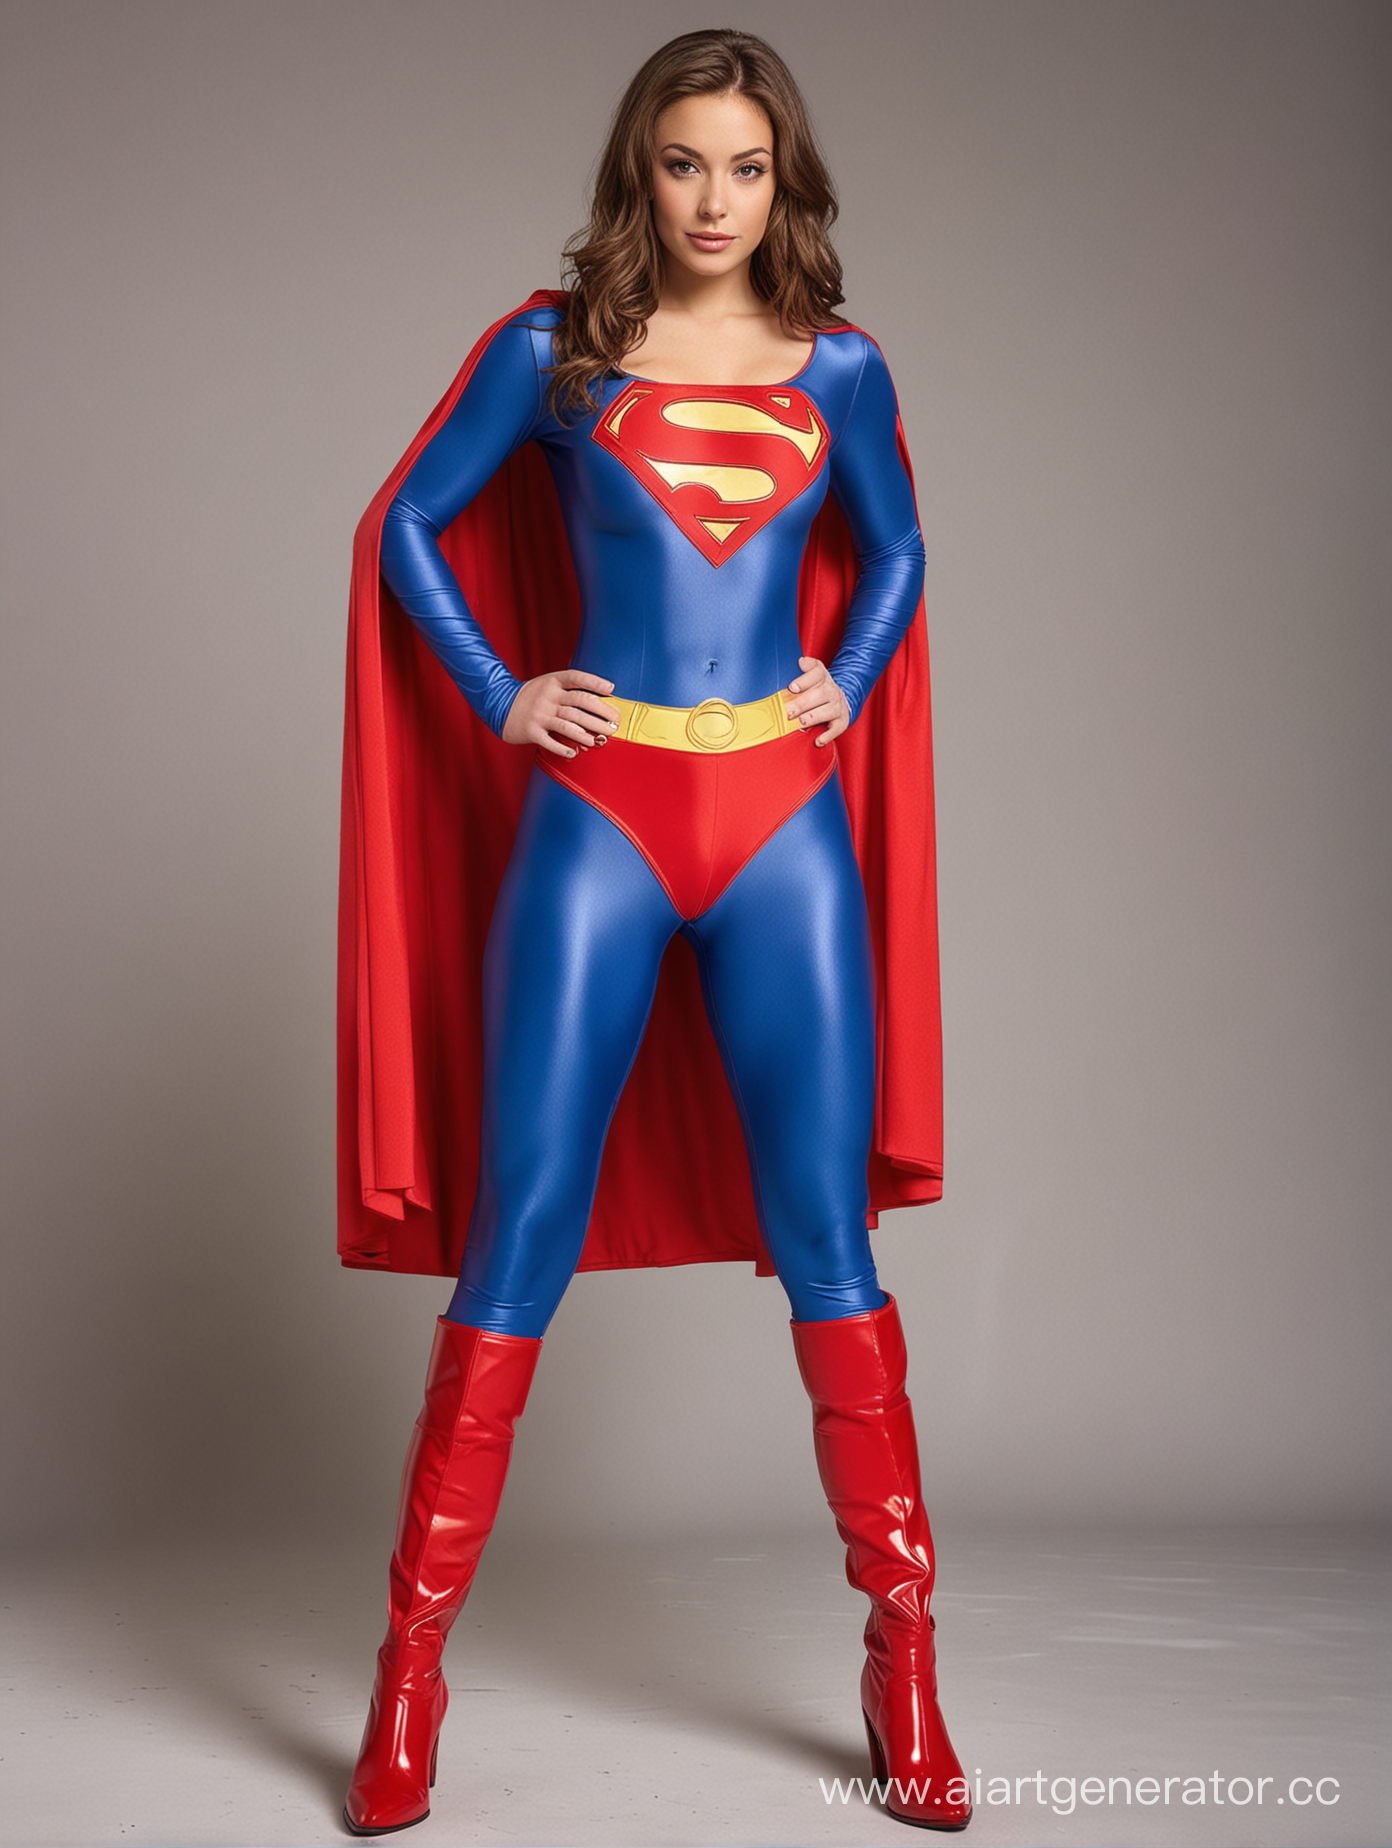 A pretty woman with brown hair, age 20, she is confident and proud, her body is very muscular, she is wearing the classic Superwoman costume with blue spandex leggings, red briefs, red boots, red cape